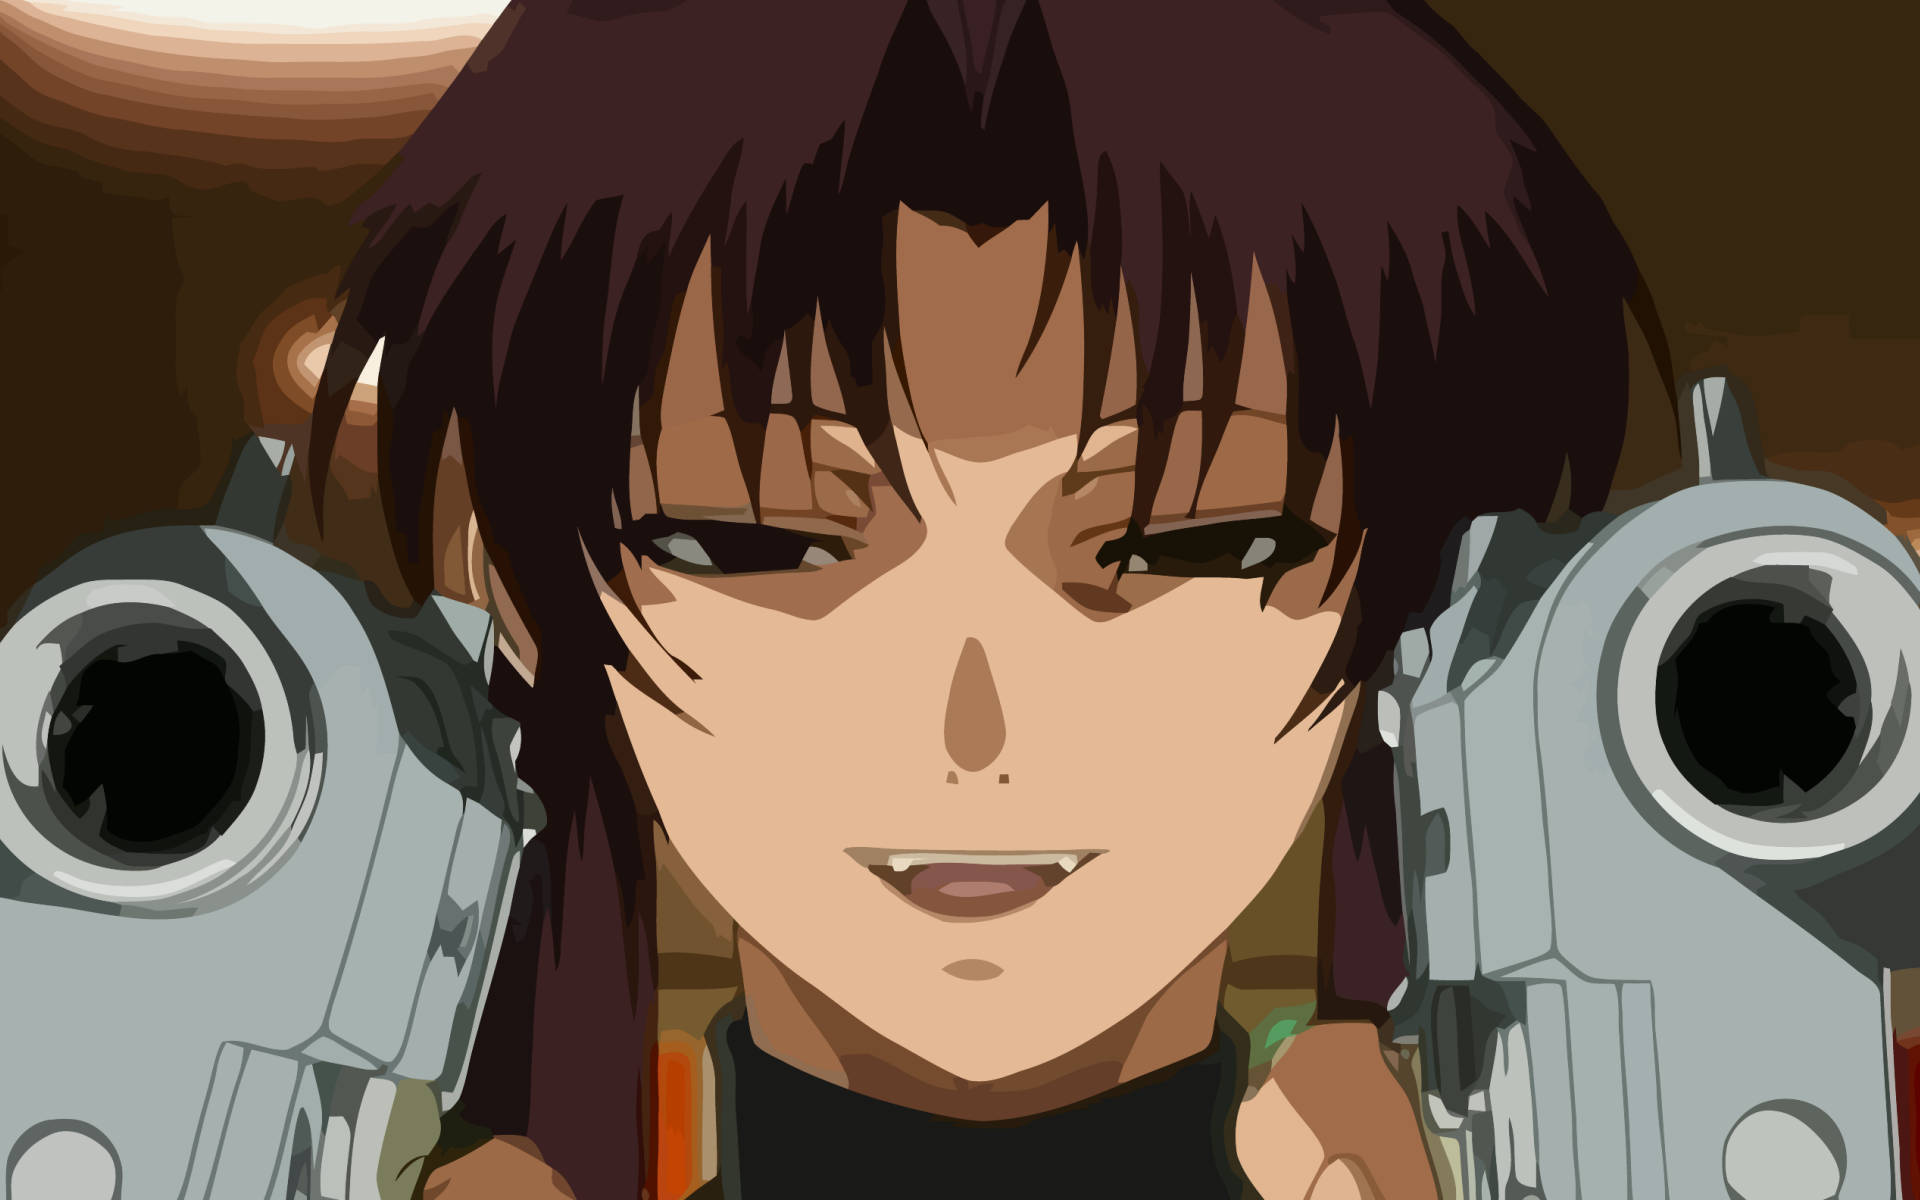 The Best Revy Quotes From Black Lagoon (With Images)